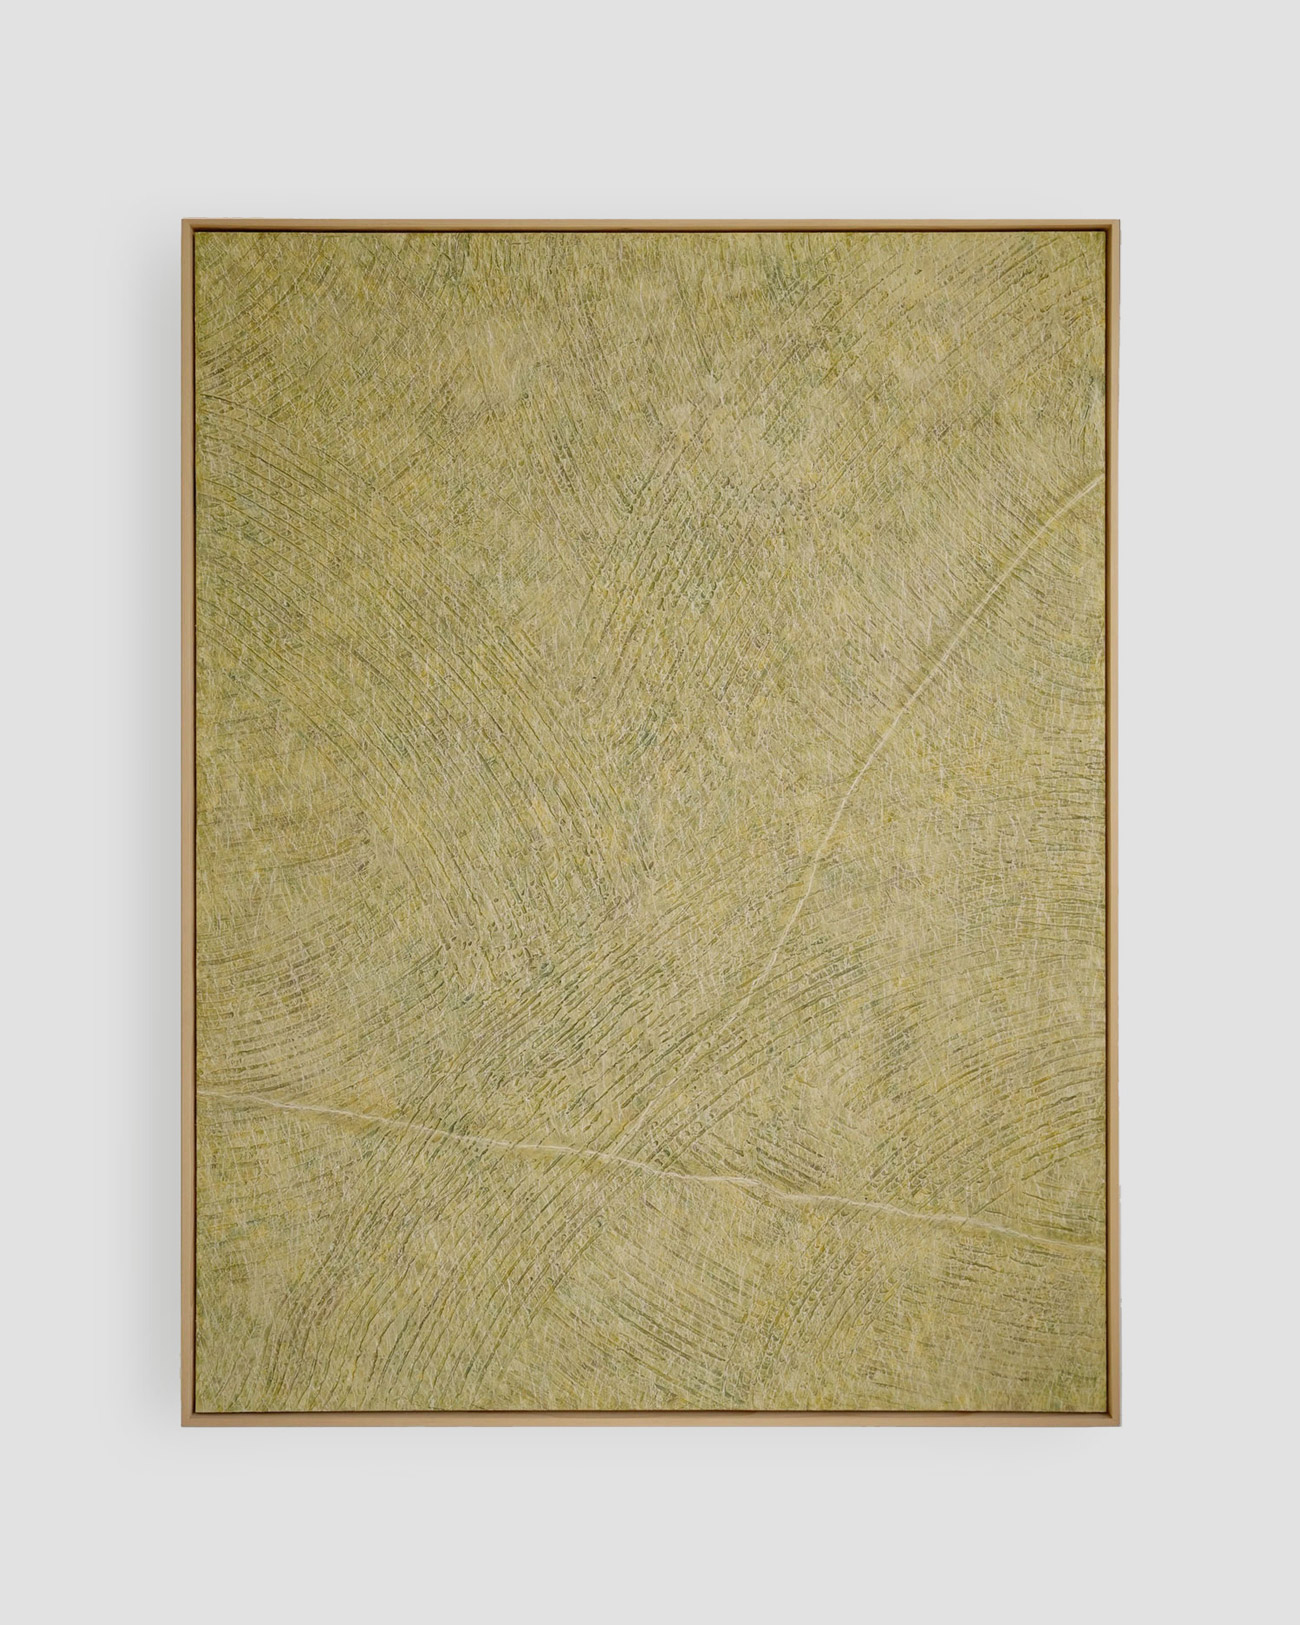 Woo Byoung Yun, Superposition No.23-04-201, 2023, Plaster & gouache on wood panel, 145.5 x 112.1 cm